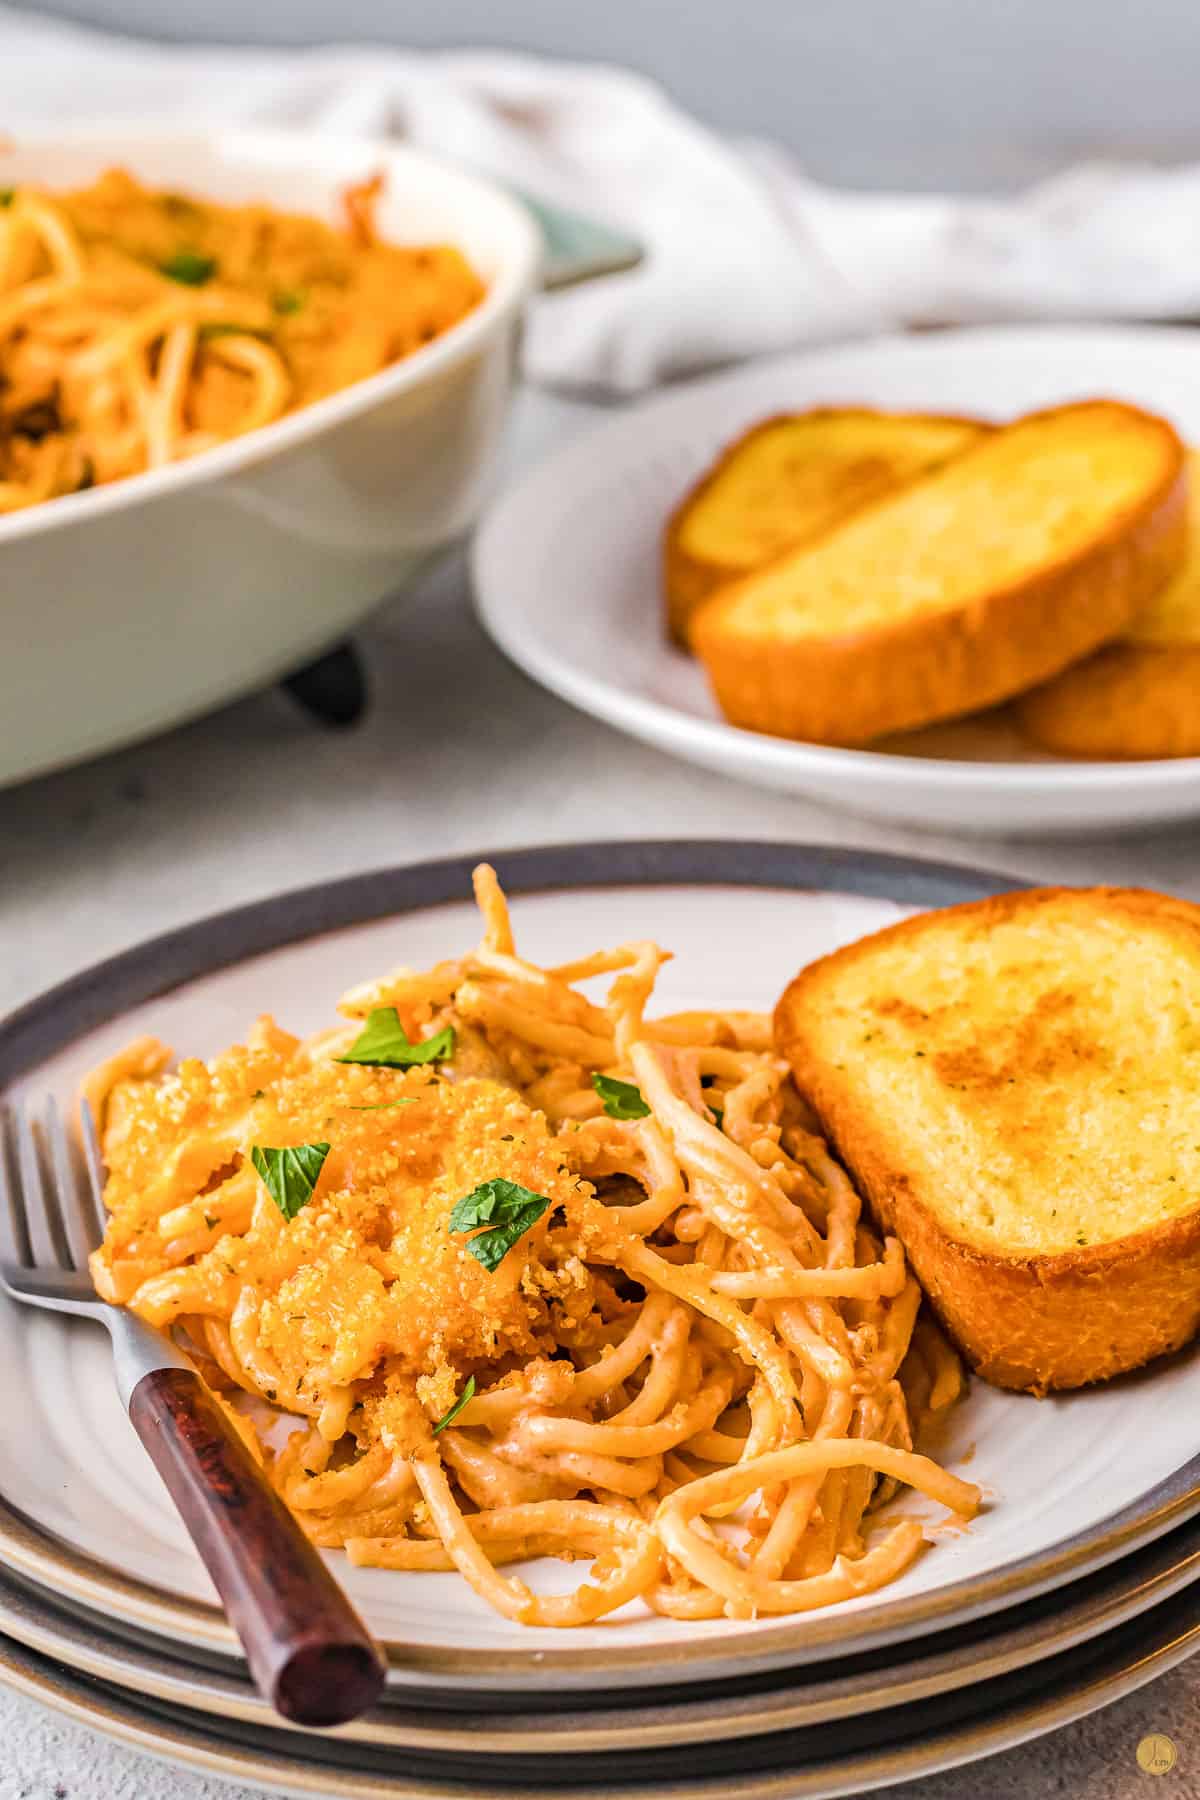 two plates of pasta with garlic bread